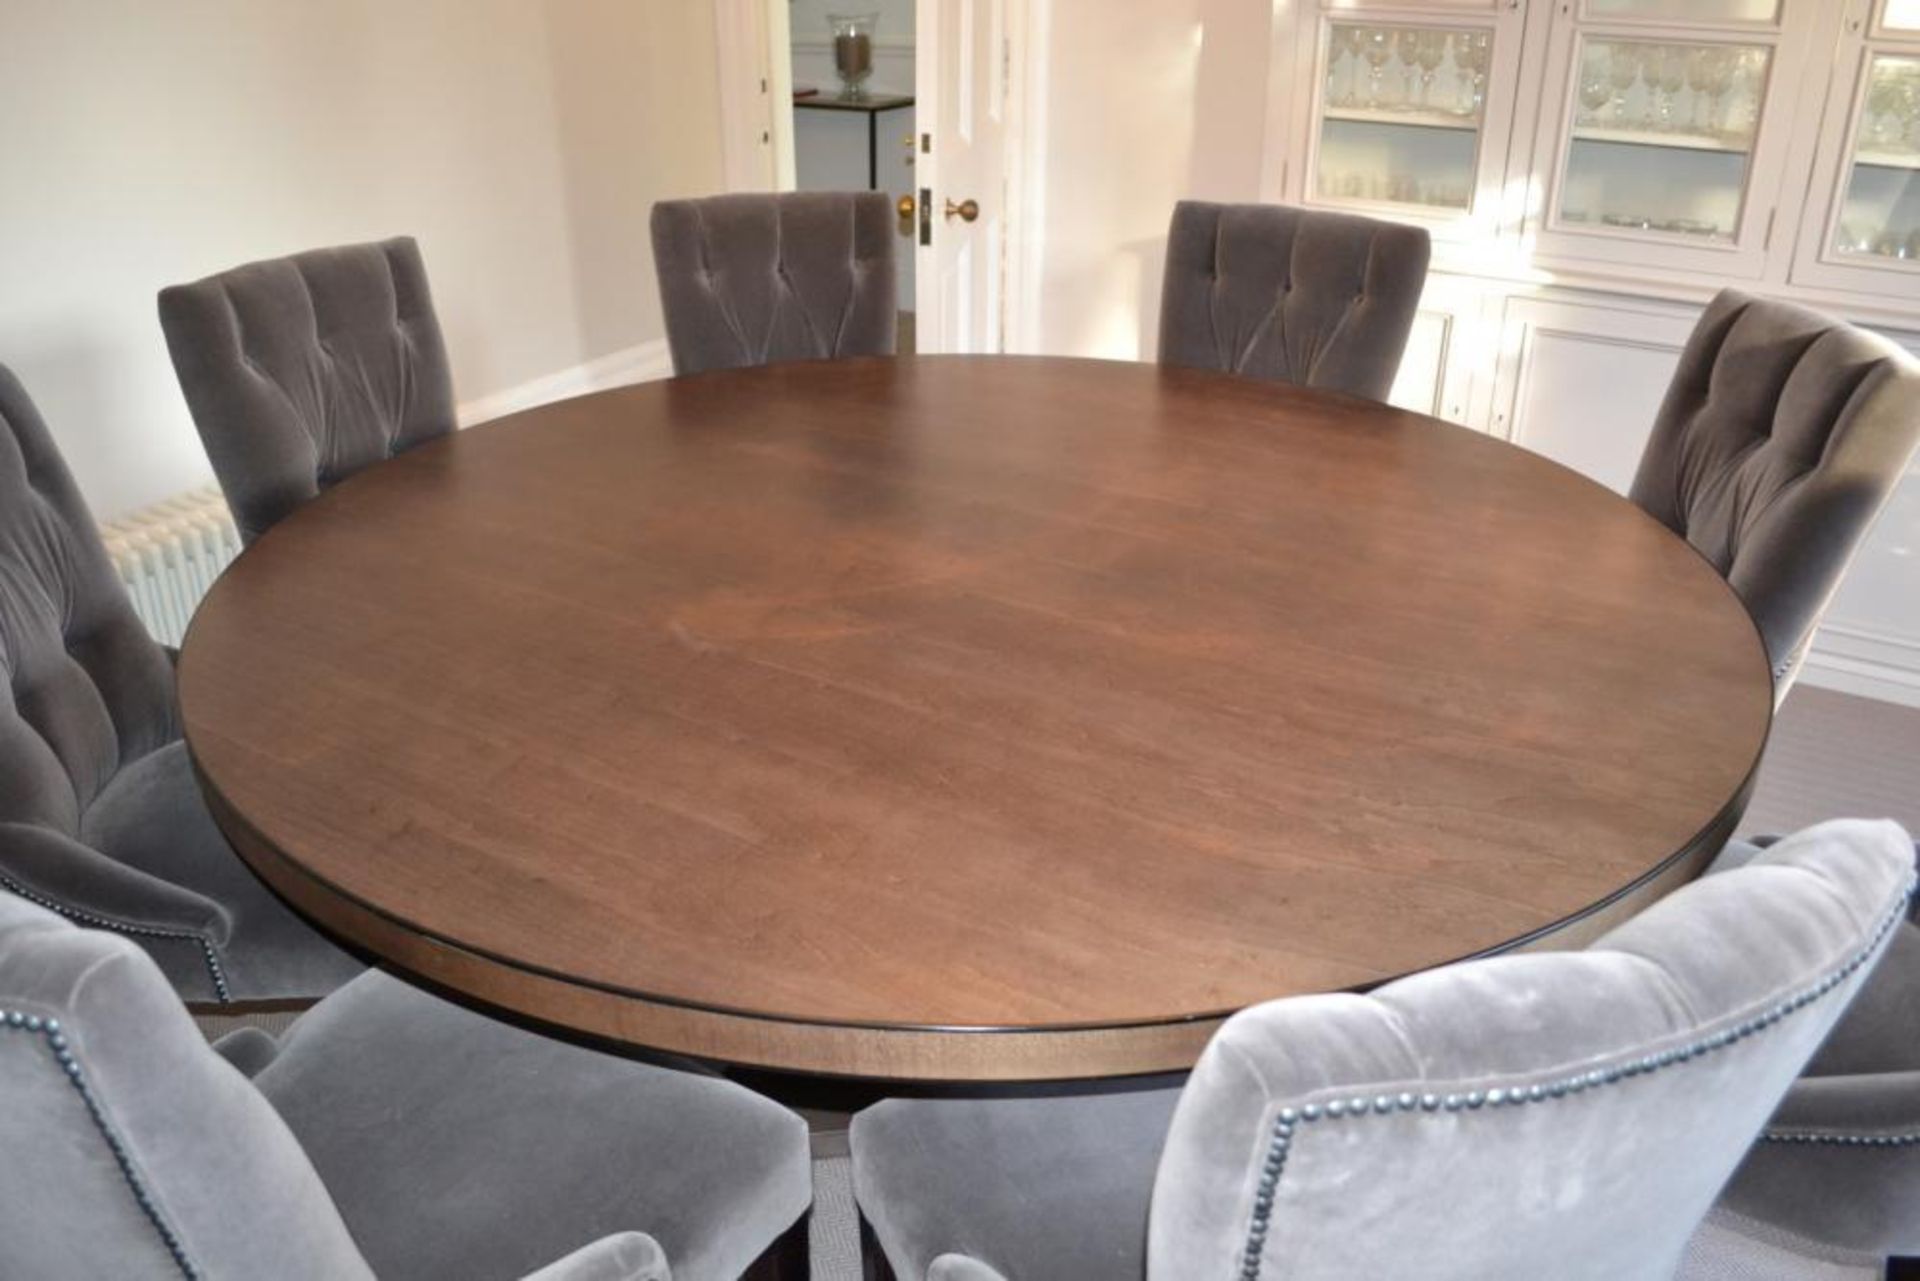 1 x Bespoke Round Dining Table With Sycamore Wood Finish - 1800mm Diameter - Ideal For Family Gather - Image 10 of 14